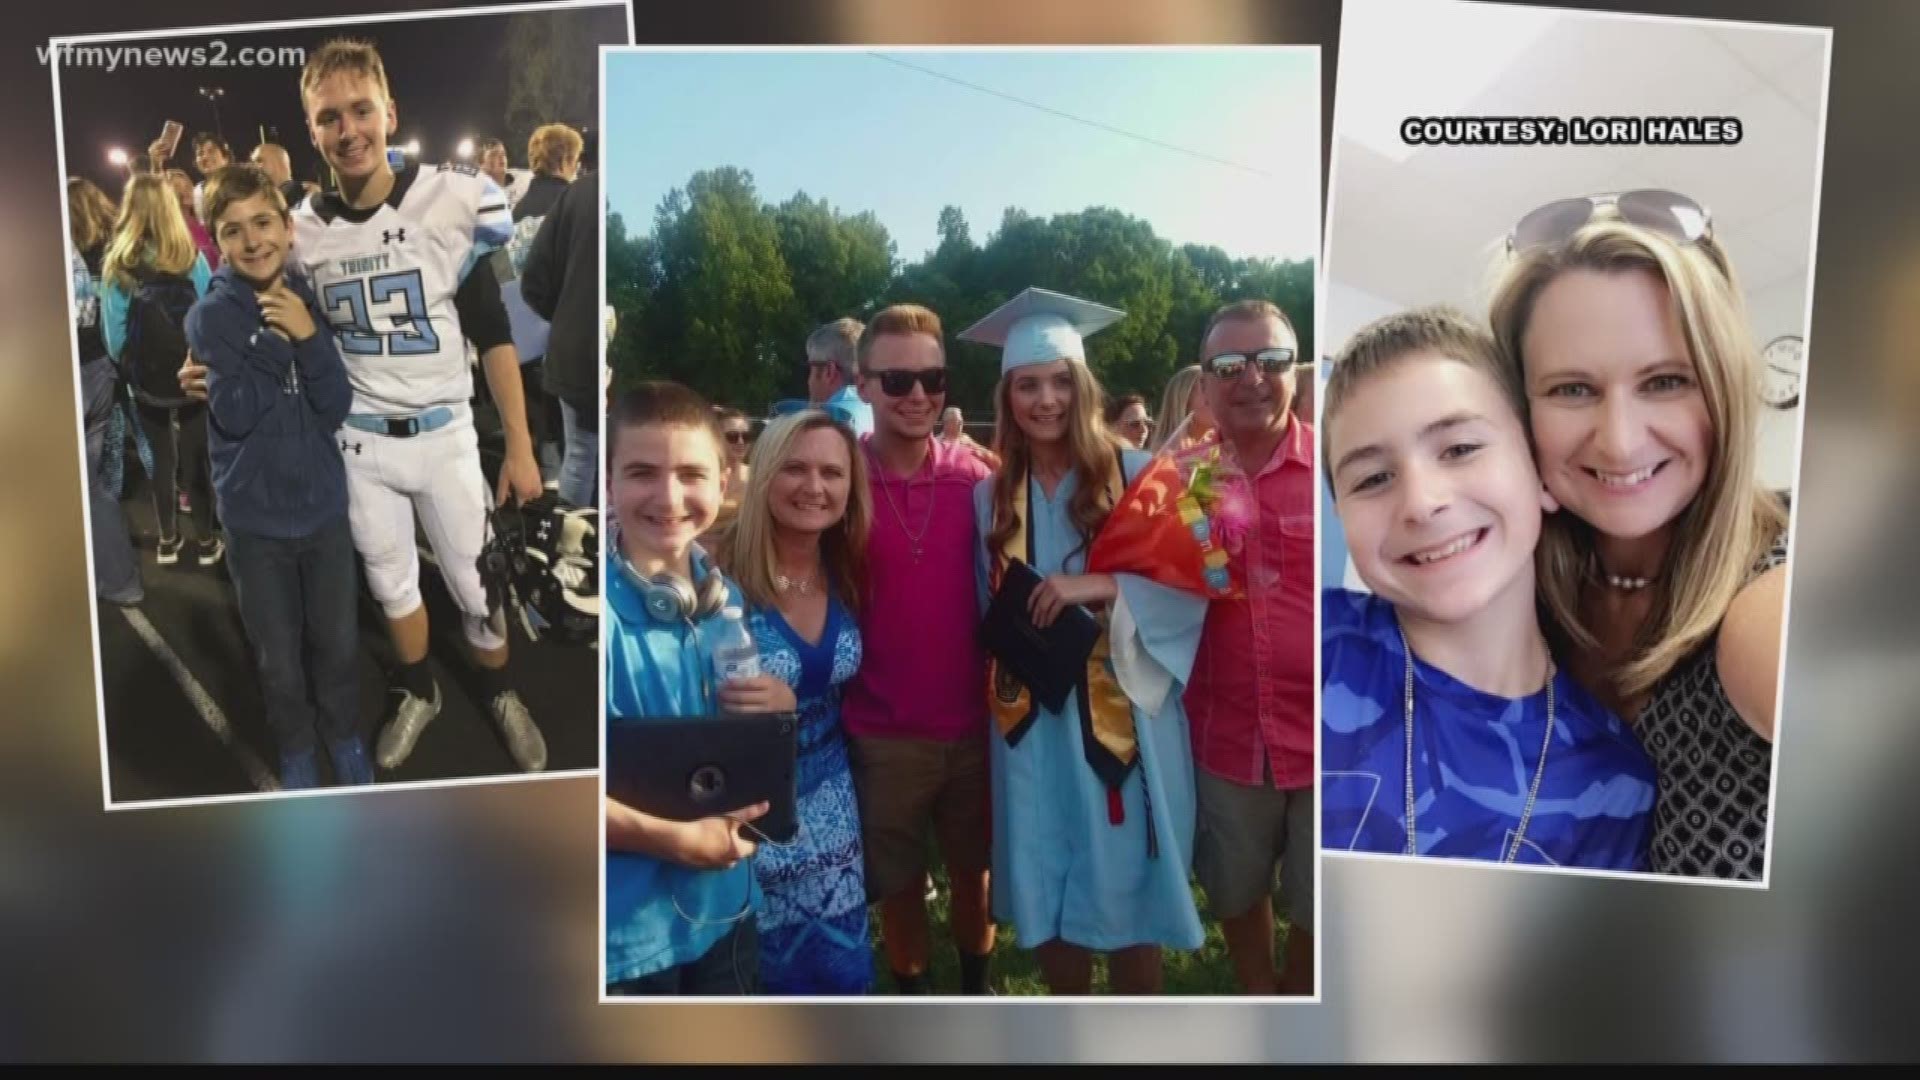 Archdale Community Raises Money for Young Man Who Survived Accident